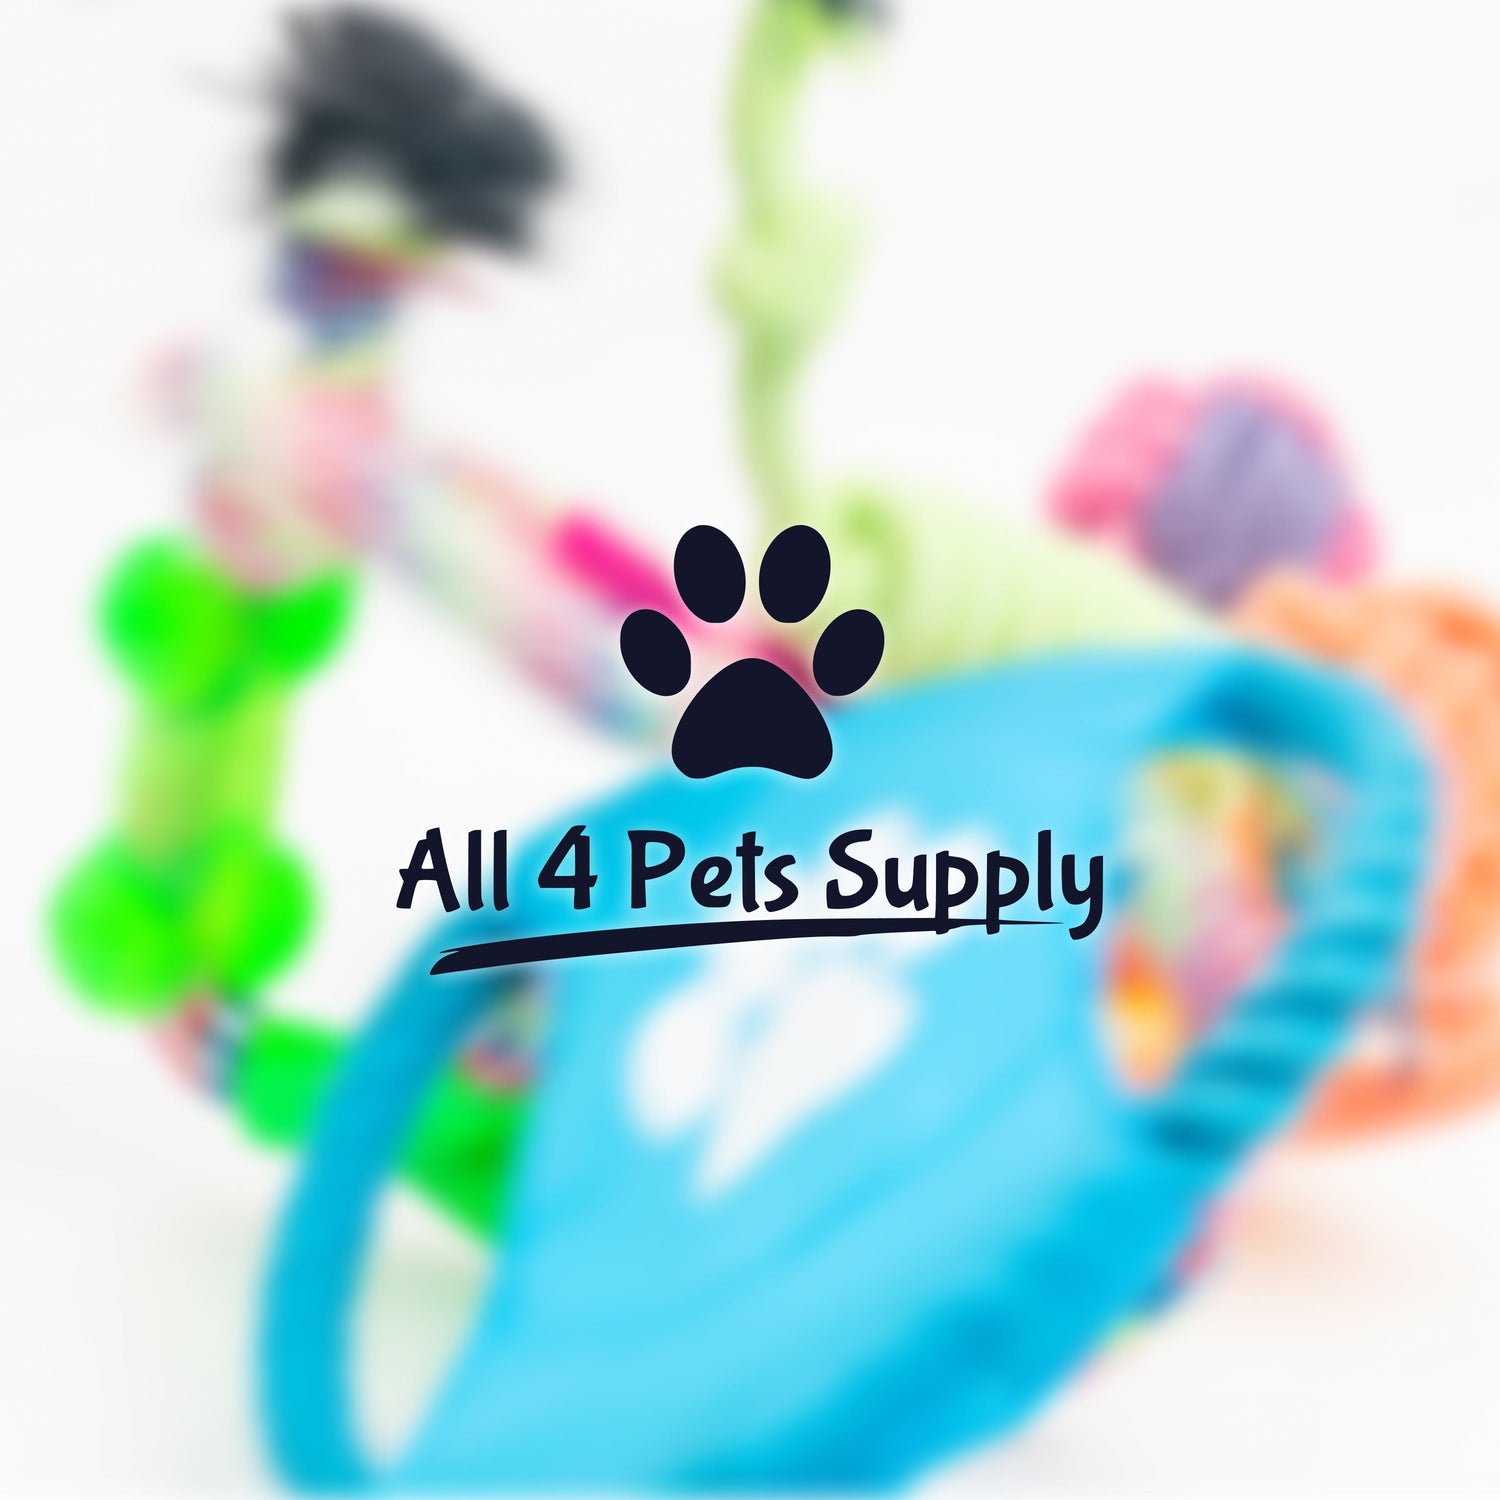 All 4 Pets Supply